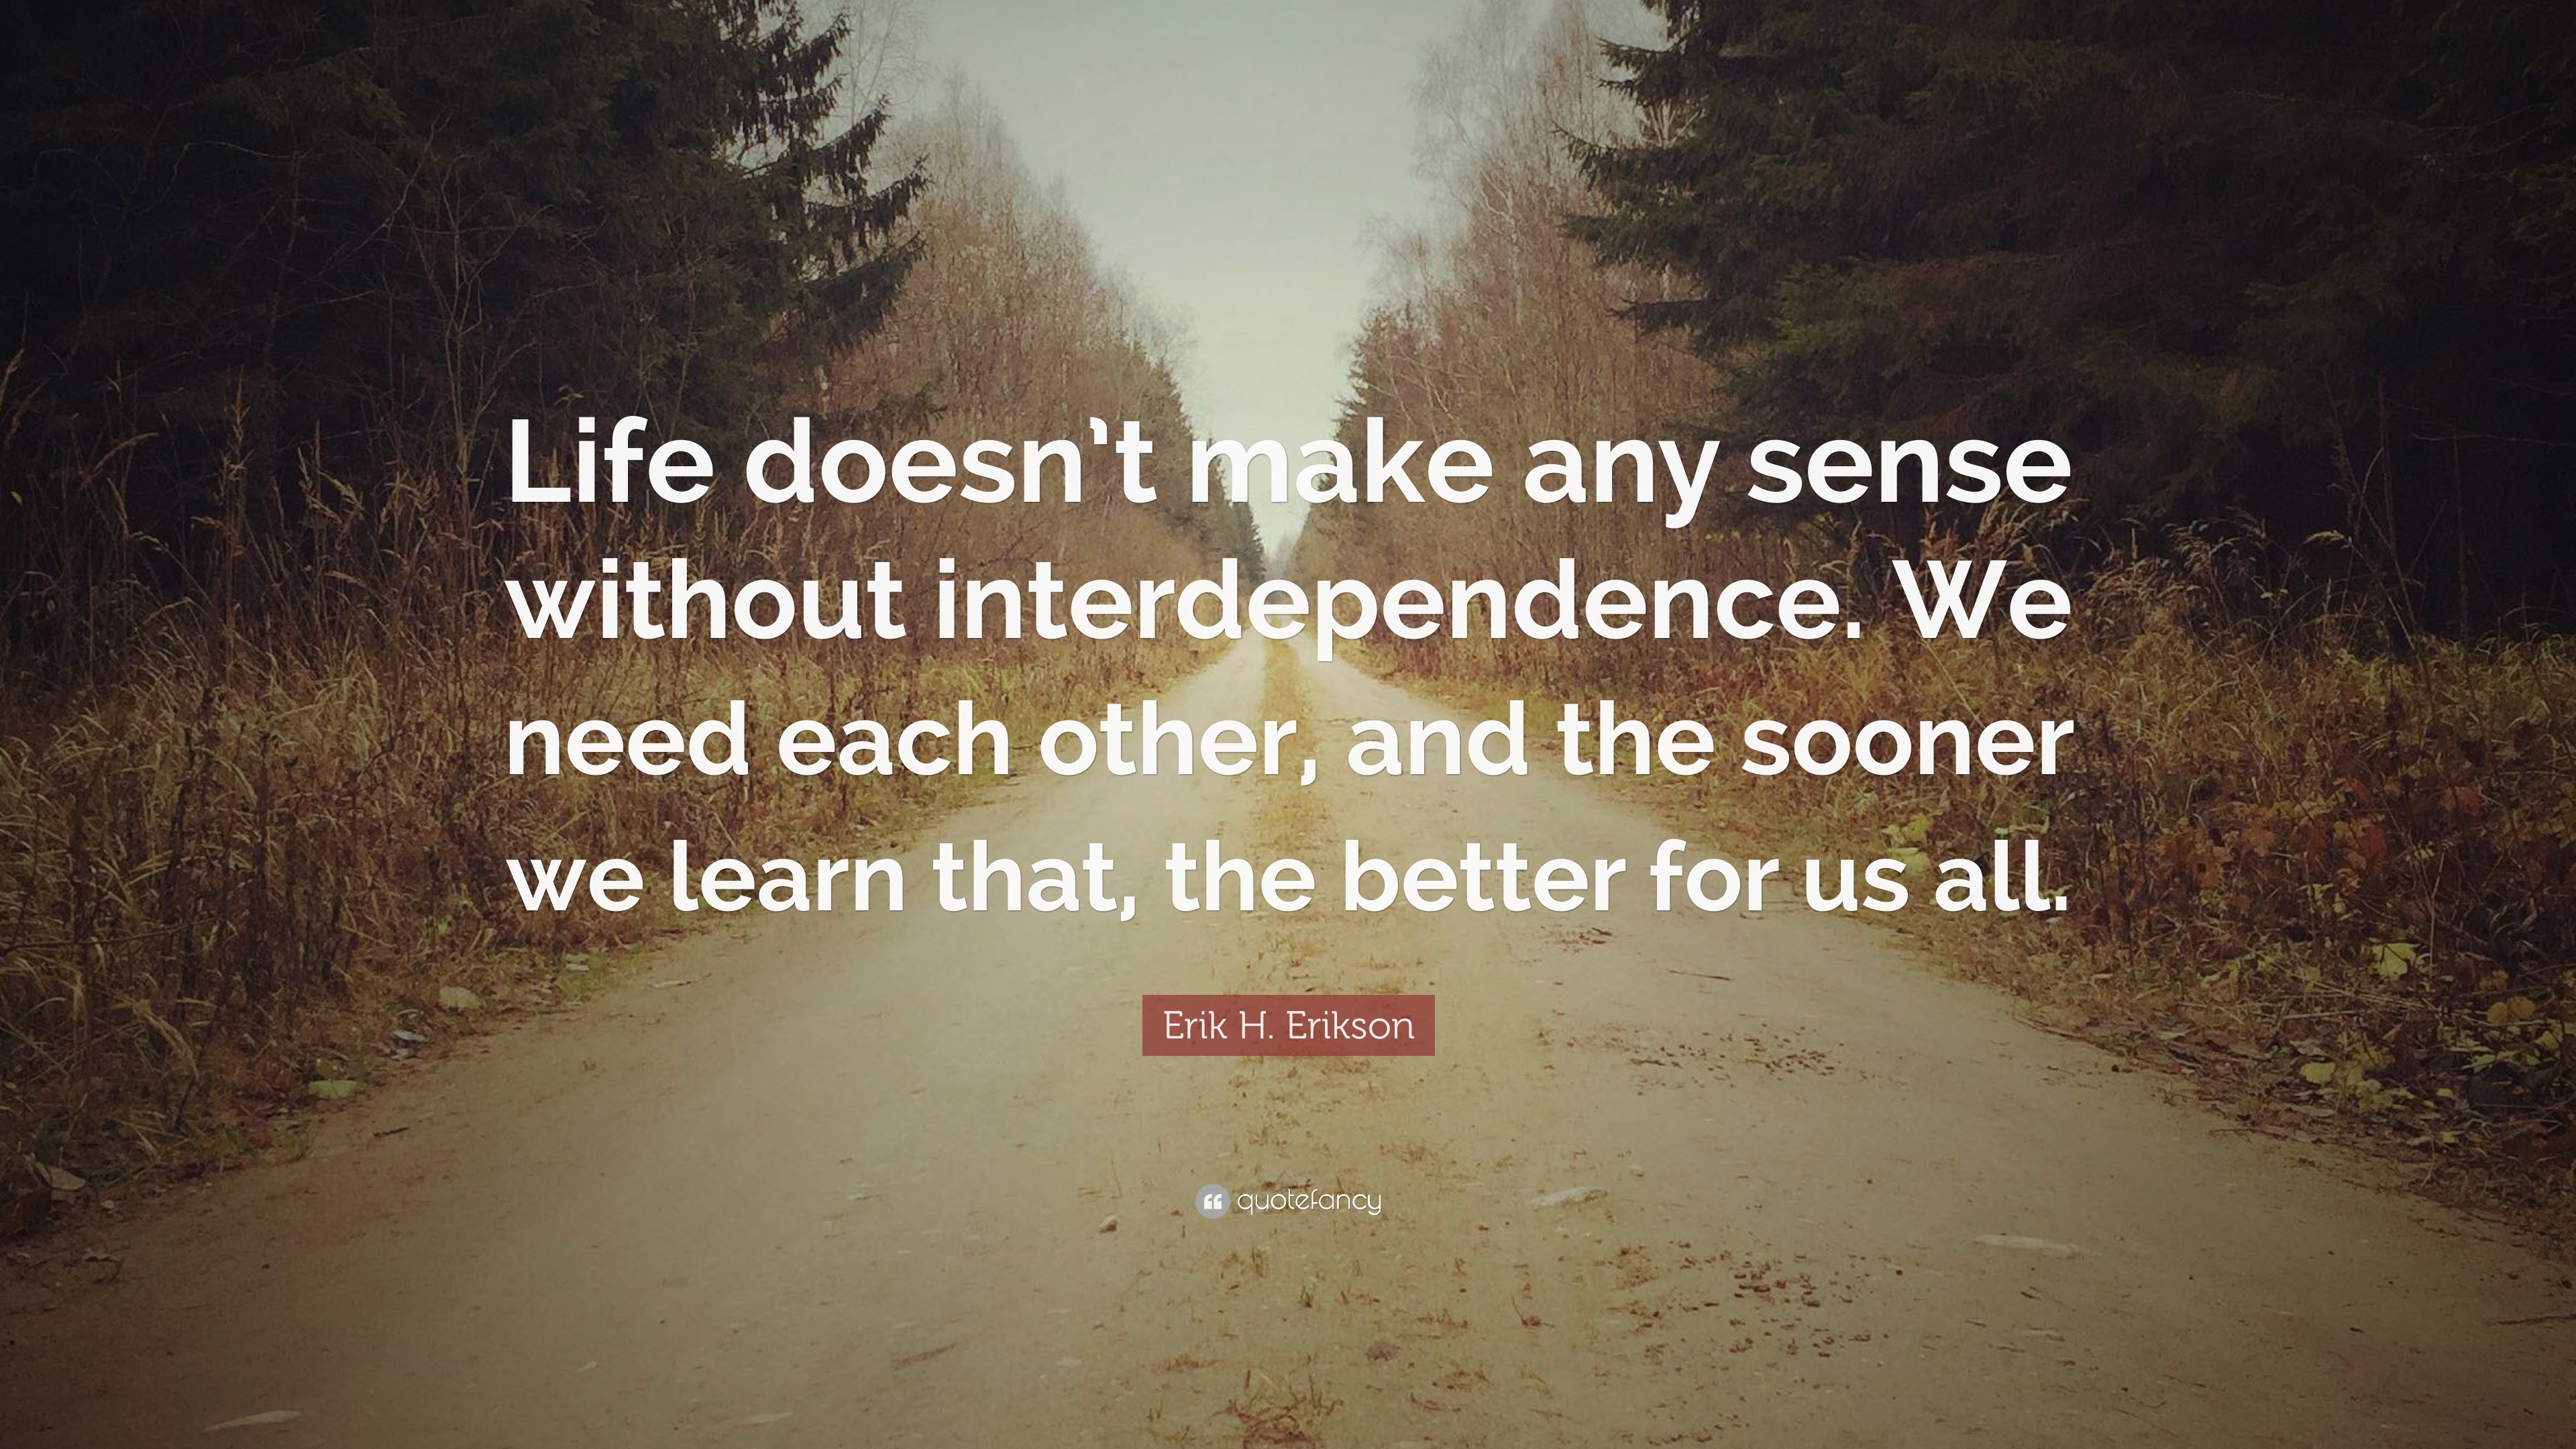 Erik H Erikson Quote “Life doesn t make any sense without interdependence